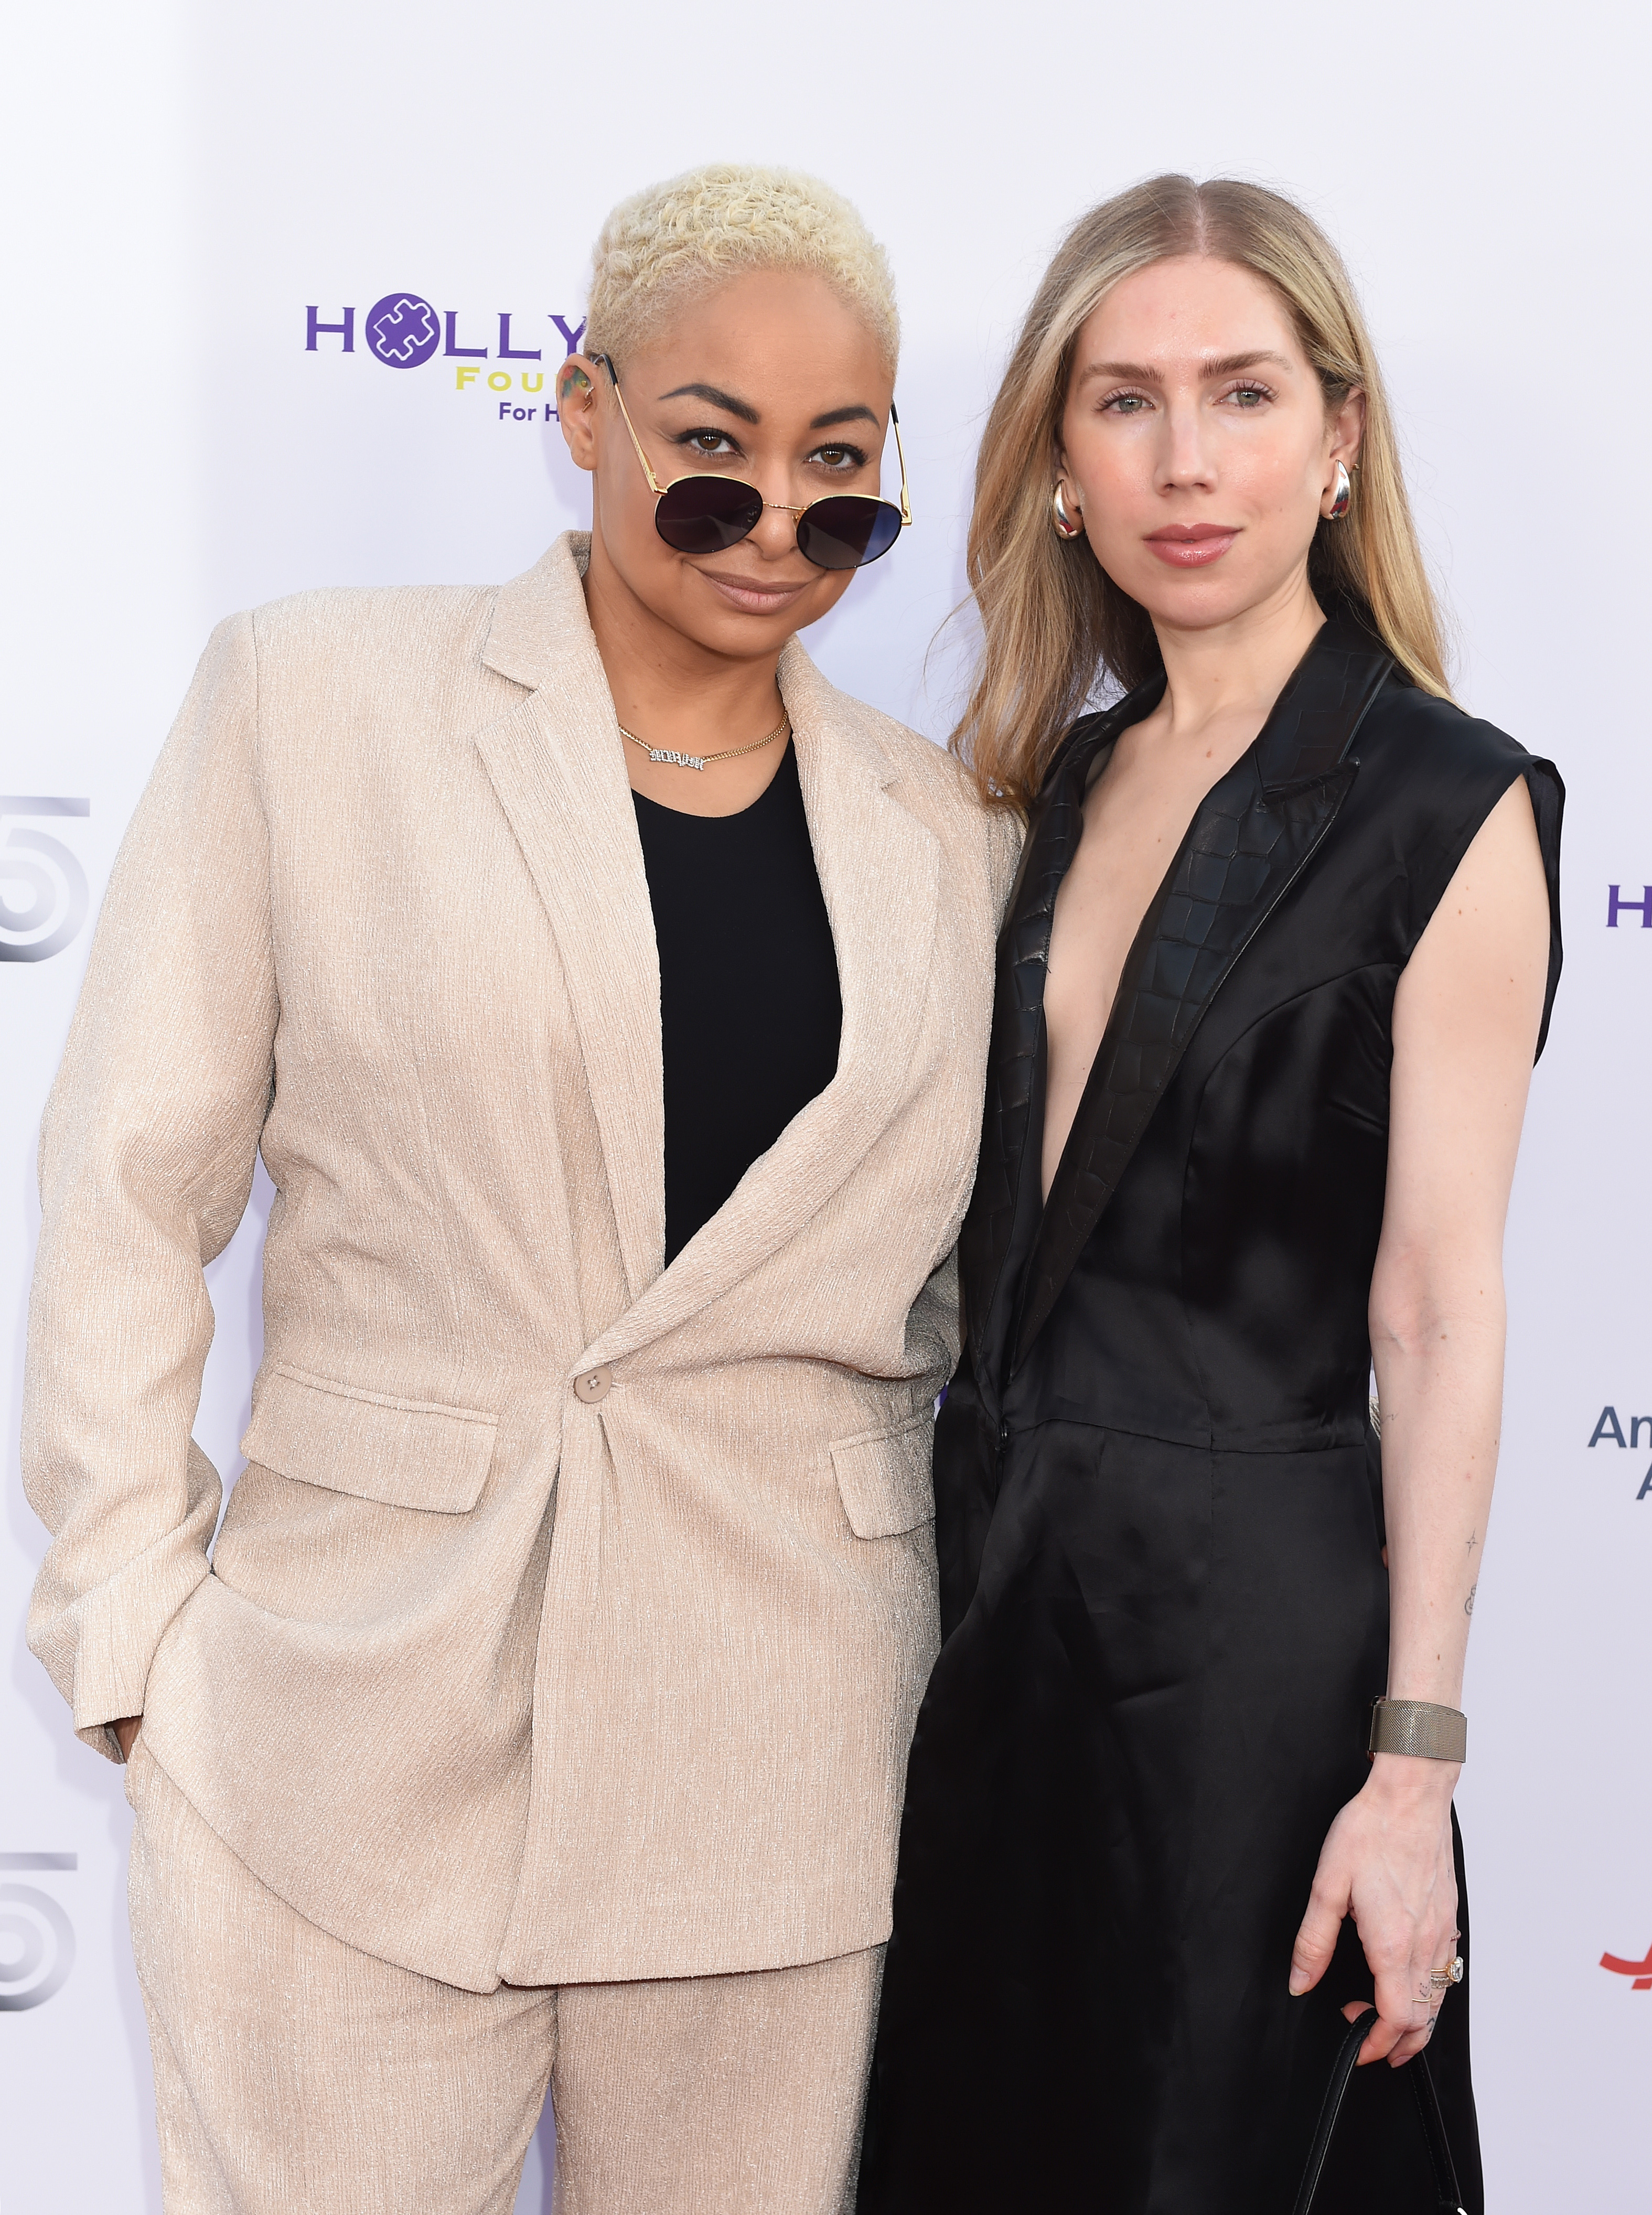 Close-up of Raven-Symoné and Miranda at a media event